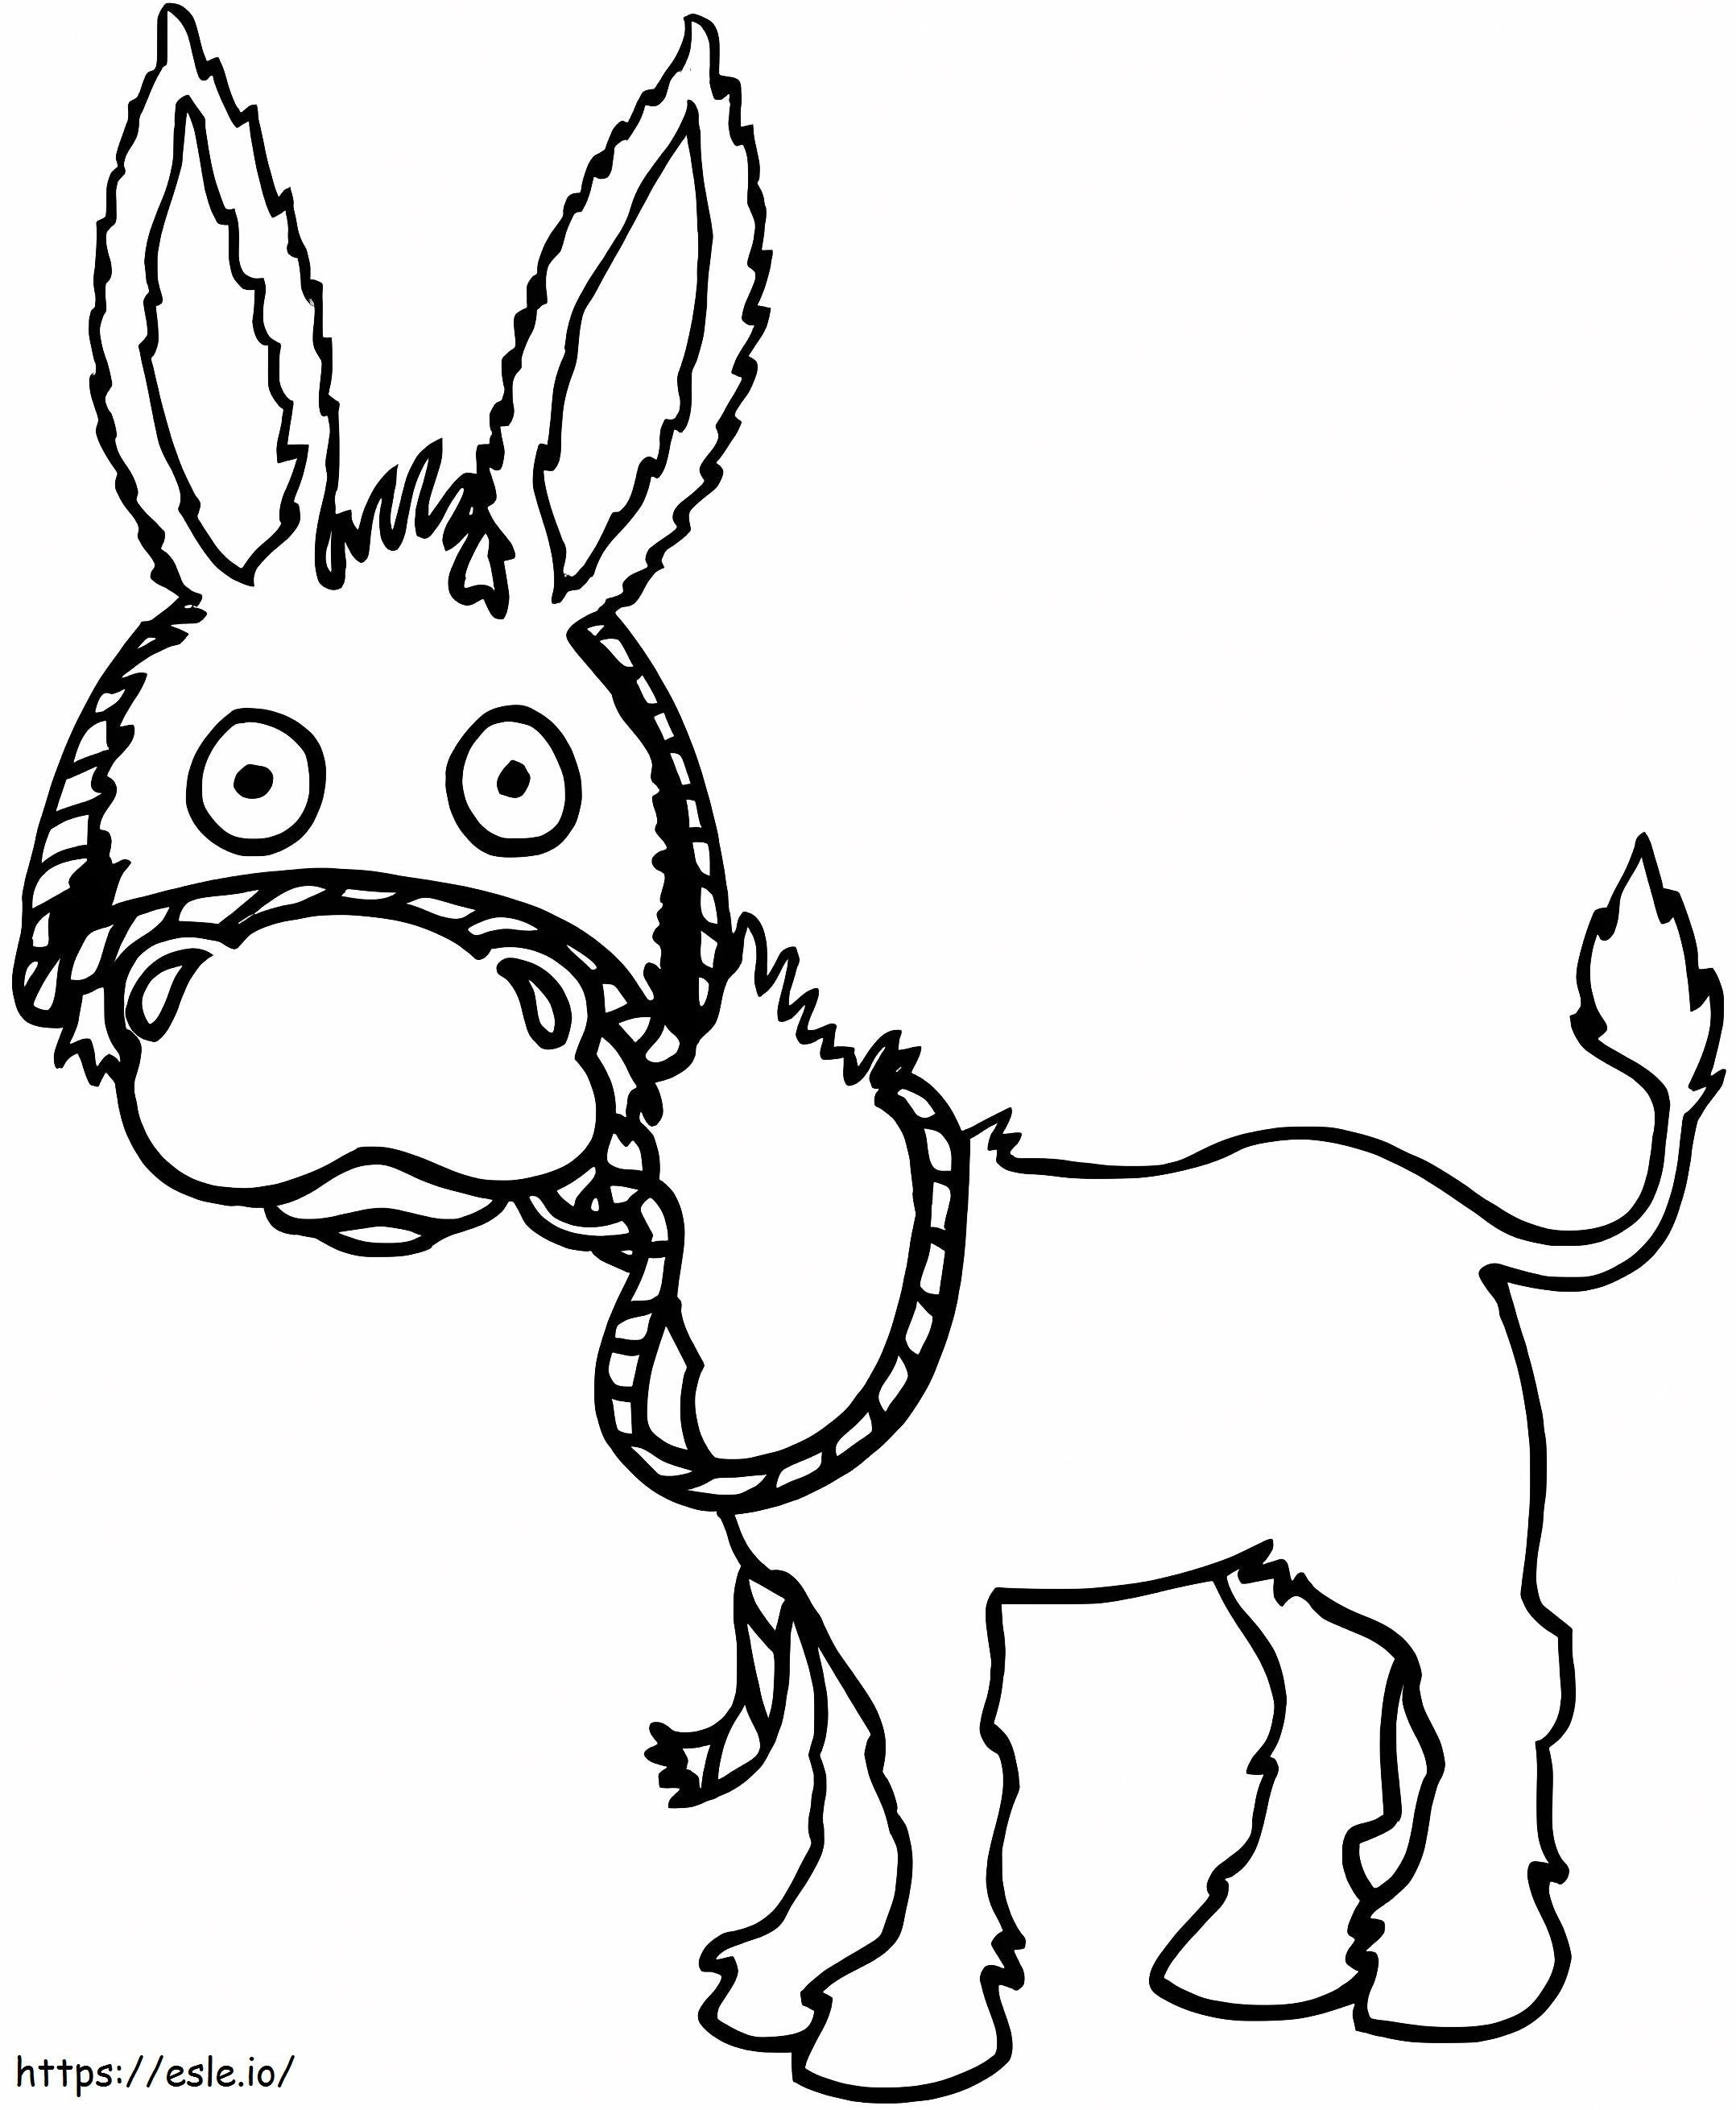 Sweet Donkey coloring page